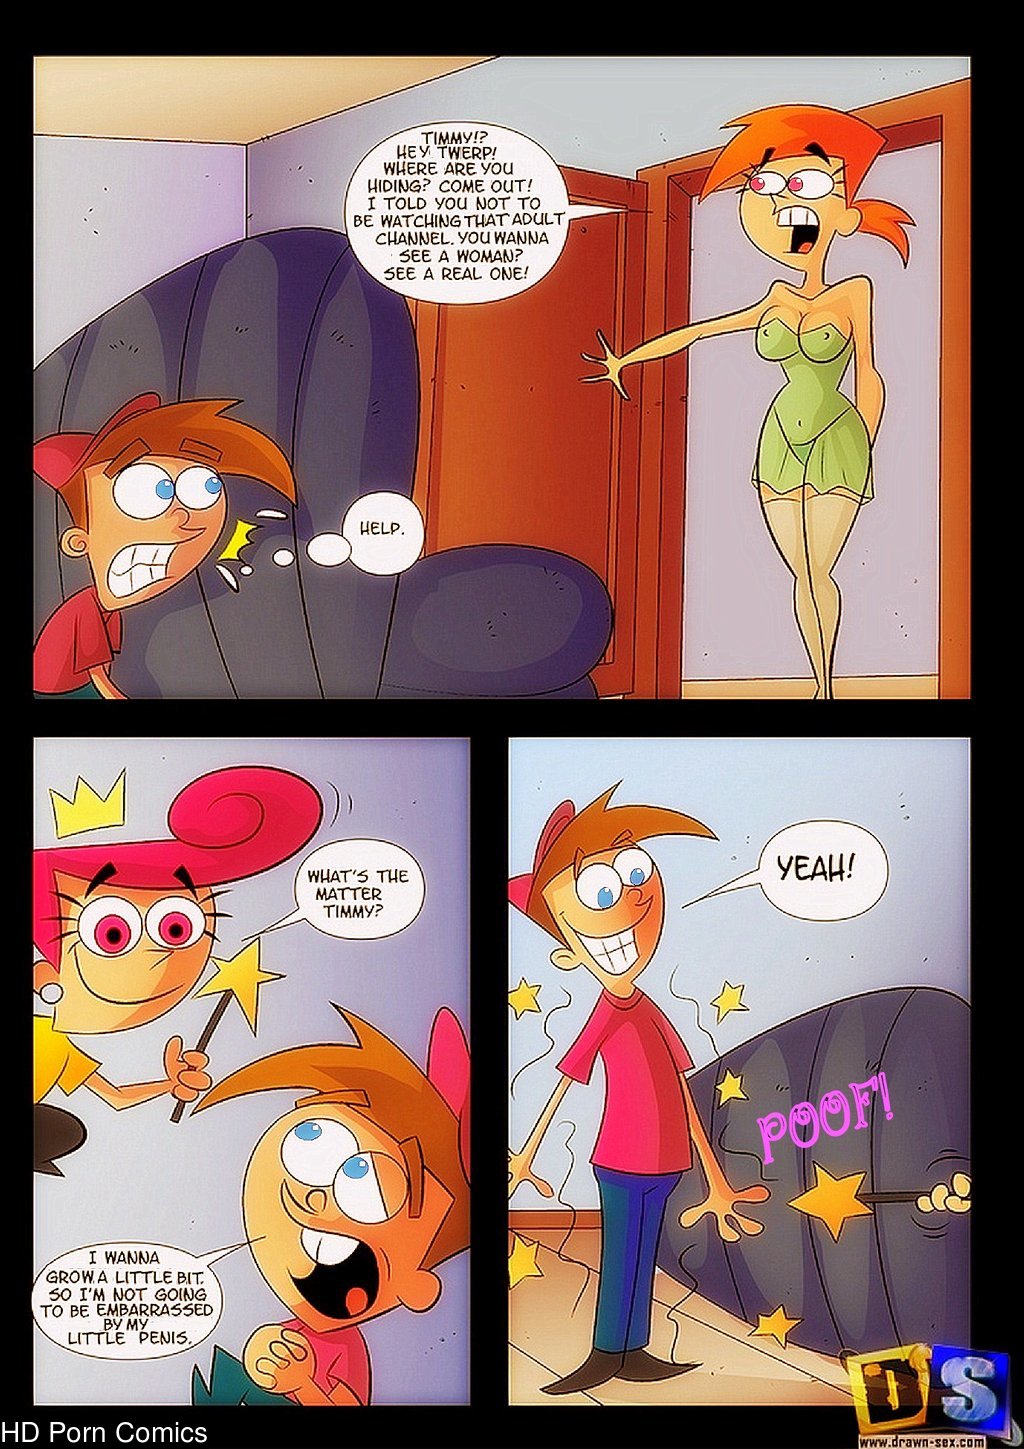 Fairly Oddparents Sex Timmys Mom - Fairly Odd Parents in Timmy's Growth Spurt! comic porn - HD Porn Comics